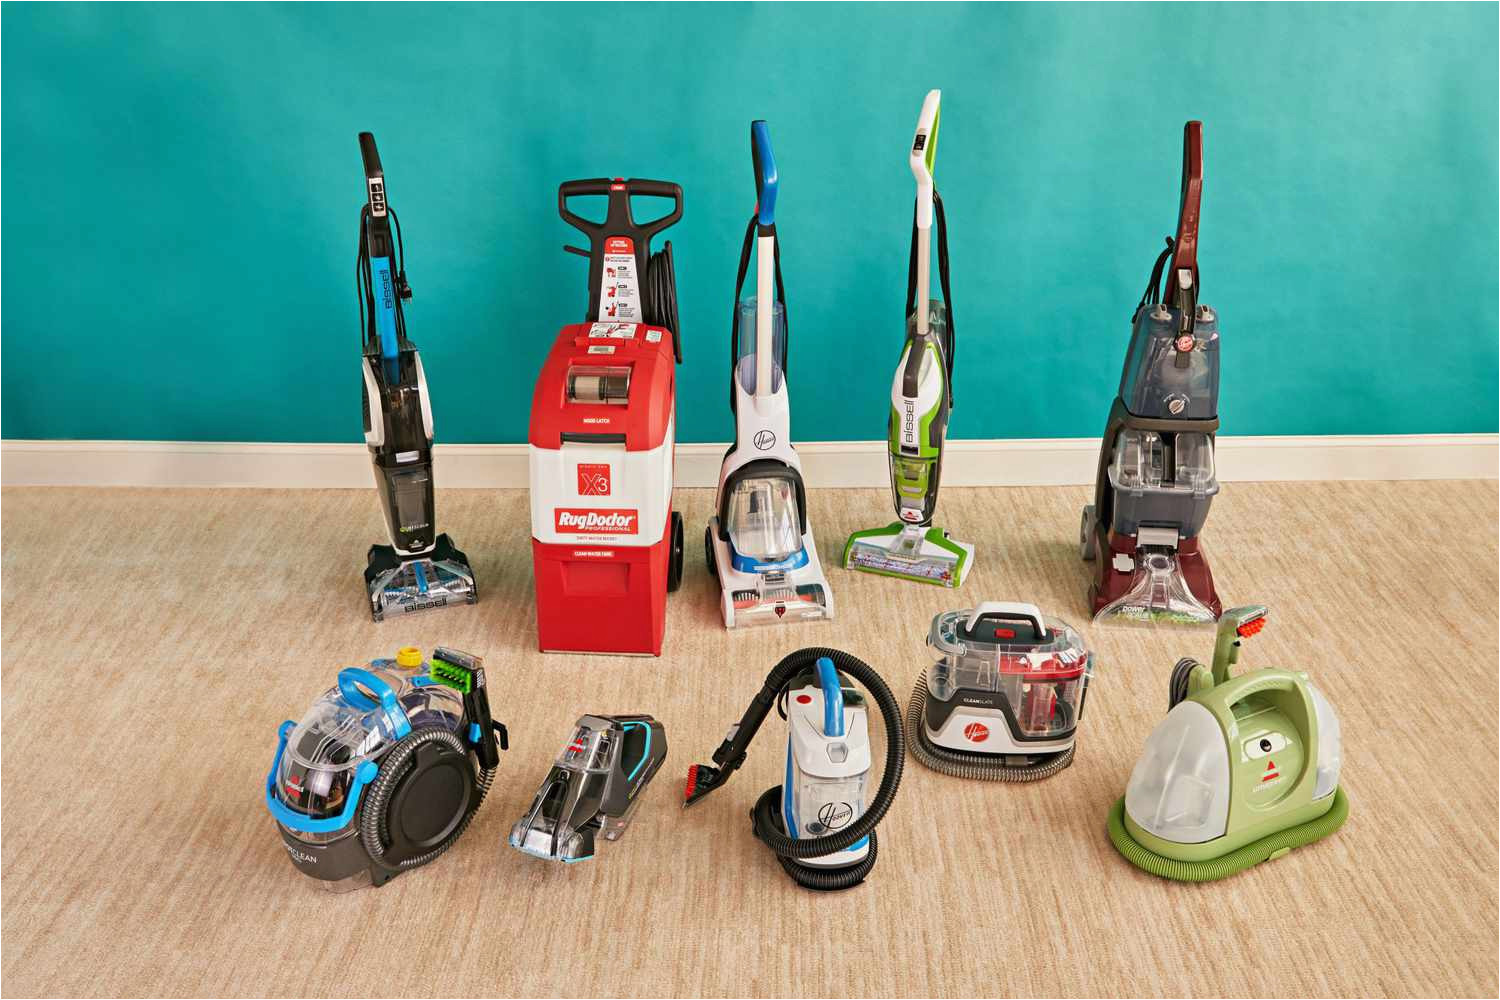 Best Steam Cleaner for area Rugs the 6 Best Carpet Cleaners, According to Our Testing